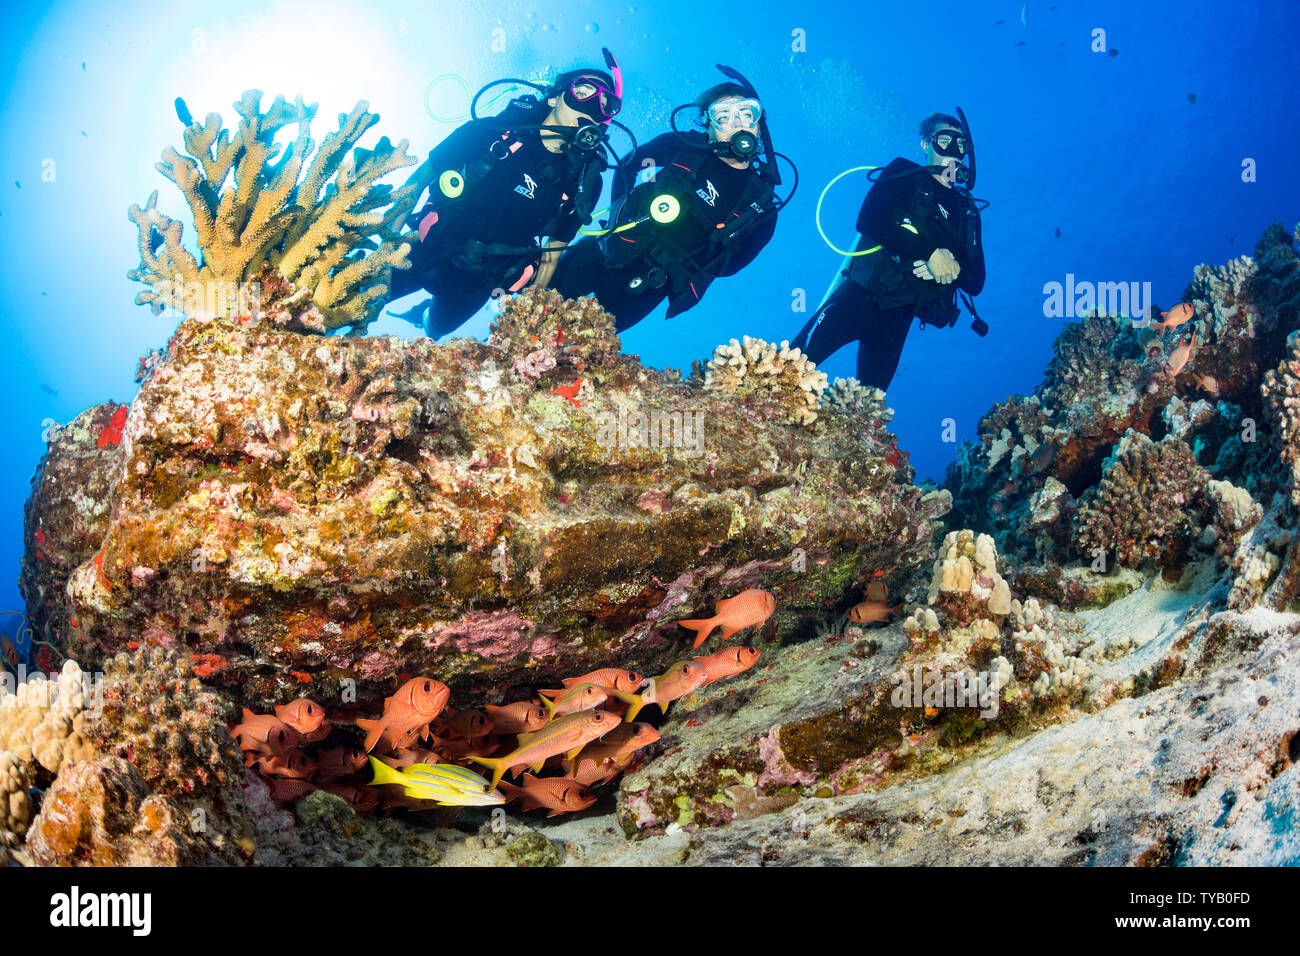 Divers (MR) and a school of shoulderbar soldierfish, Myripristis kuntee, along with goatfish and snapper, Hawaii. Stock Photo